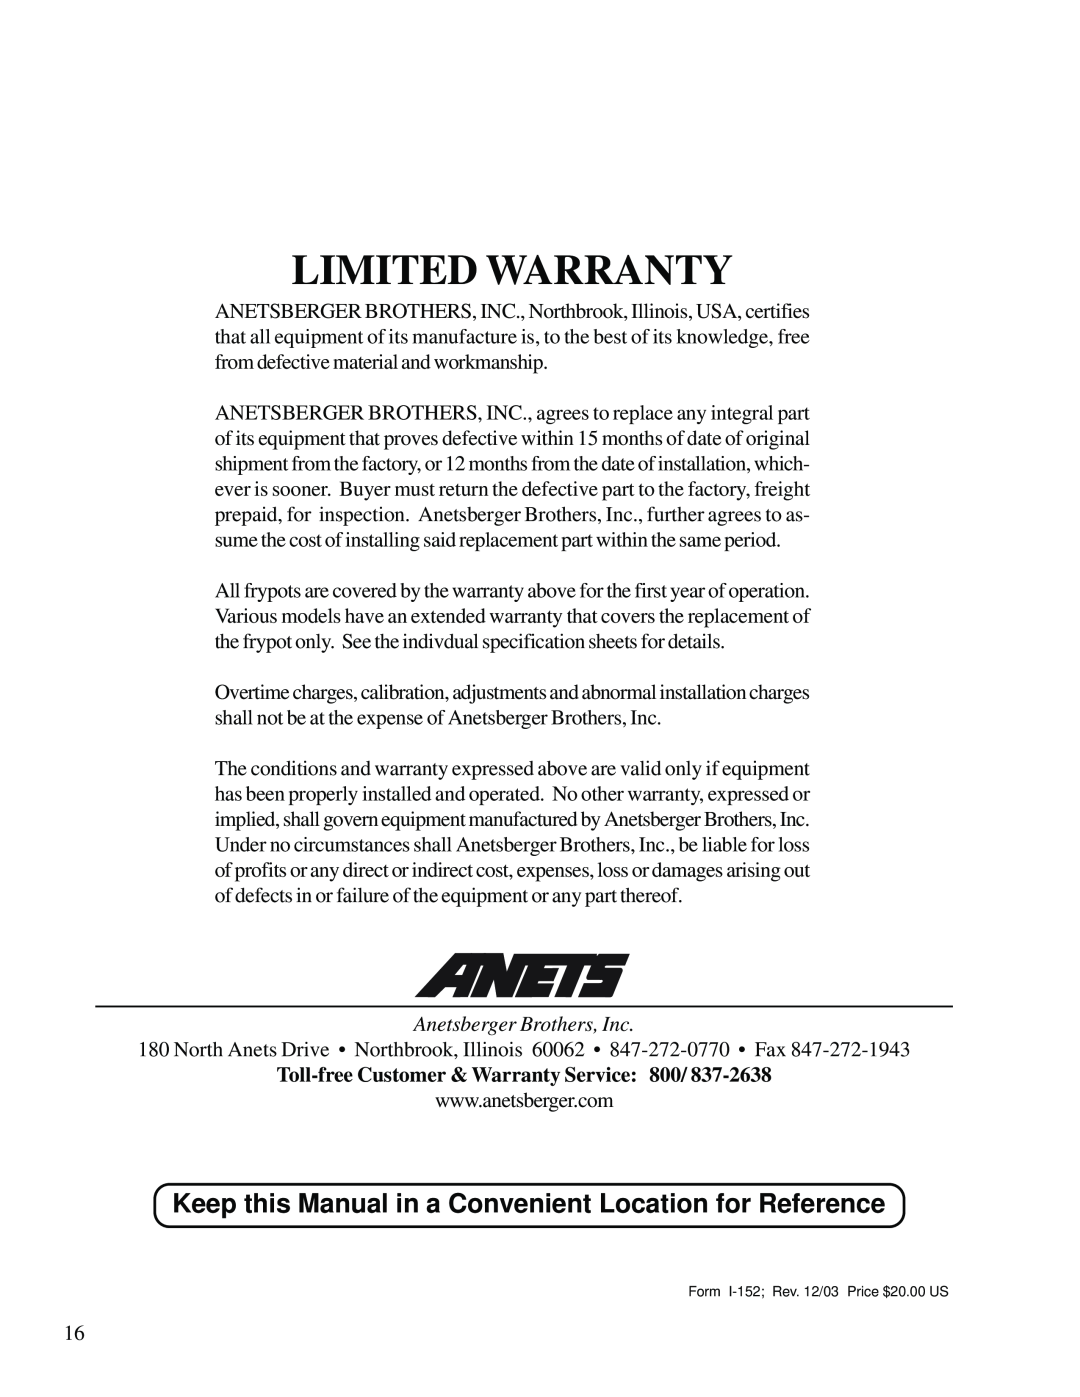 Anetsberger Brothers CF14 warranty Limited Warranty, Anetsberger Brothers, Inc, Toll-freeCustomer & Warranty Service 